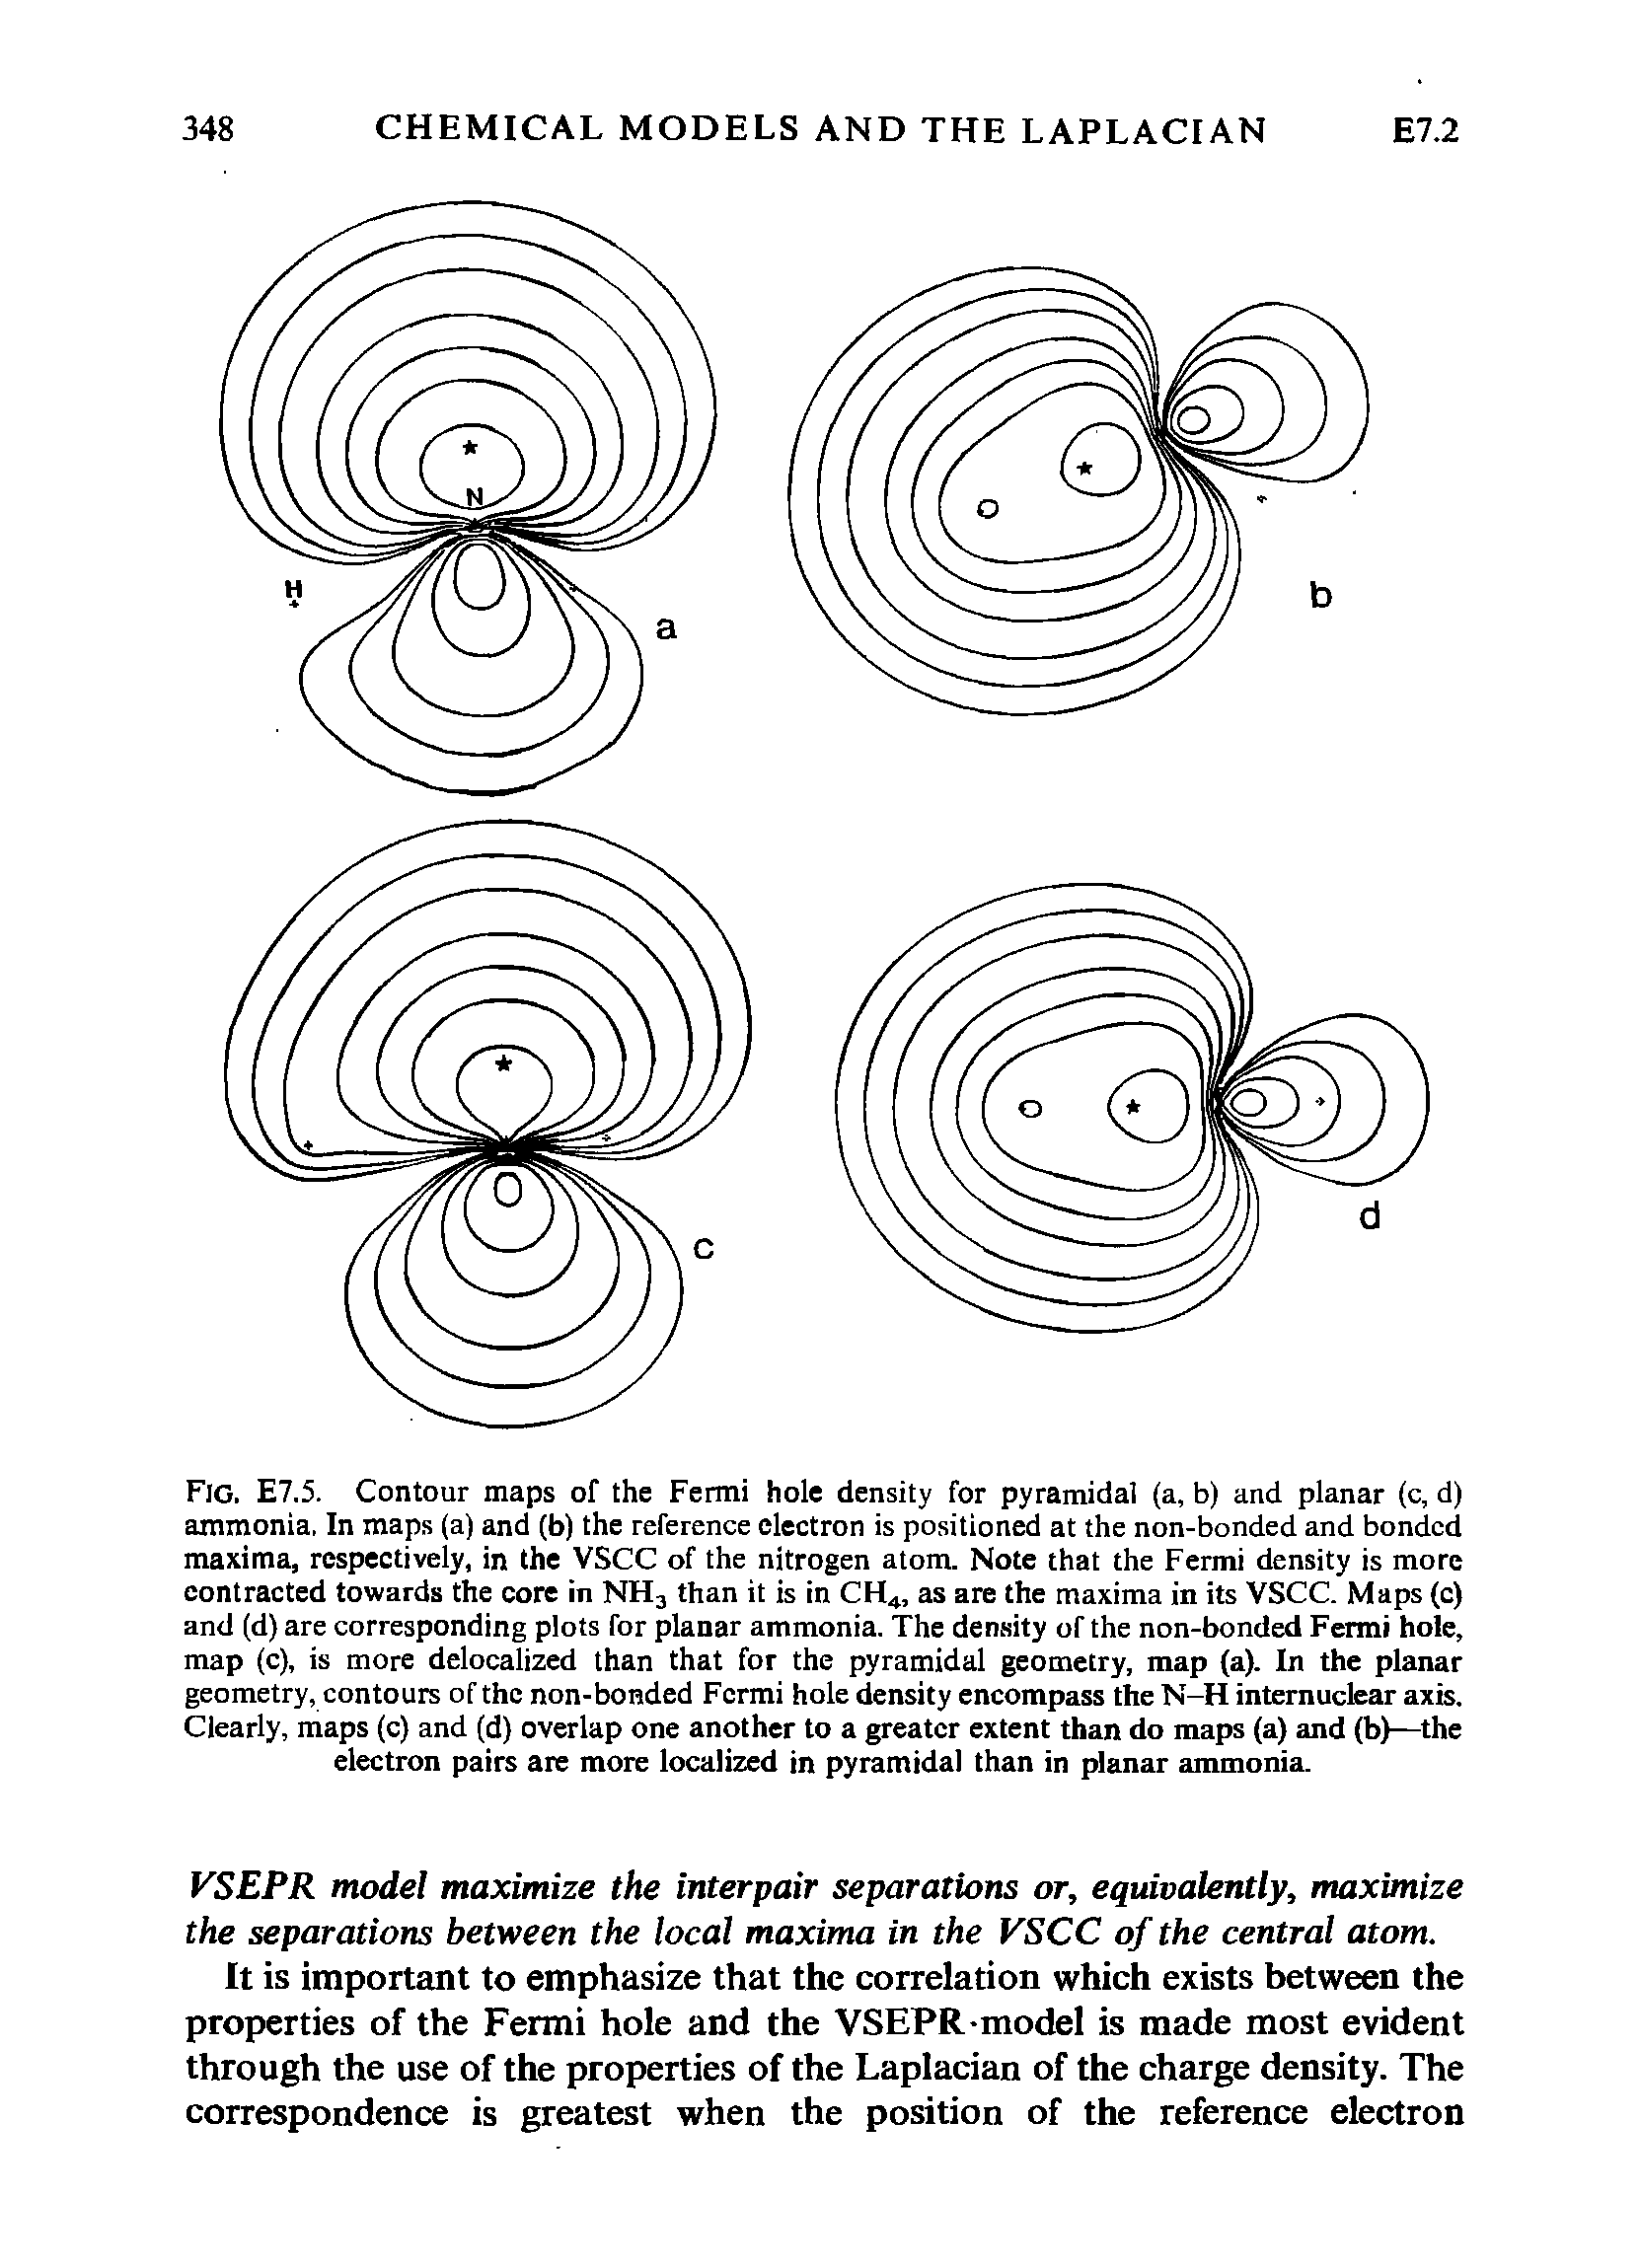 Fig. E7.5. Contour maps of the Fermi hole density for pyramidal (a, b) and planar (c, d) ammonia, In maps (a) and (b) the reference electron is positioned at the non-bonded and bonded maxima, respectively, in the VSCC of the nitrogen atom. Note that the Fermi density is more contracted towards the core in NH3 than it is in CH4, as are the maxima in its VSCC. Maps (c) and (d) are corresponding plots for planar ammonia. The density of the non-bonded Fermi hole, map (c), is more delocalized than that for the pyramidal geometry, map (a). In the planar geometry, contours of the non-bonded Fermi hole density encompass the N-H internuclear axis. Clearly, maps (c) and (d) overlap one another to a greater extent than do maps (a) and (b)—the electron pairs are more localized in pyramidal than in planar iunmonia.